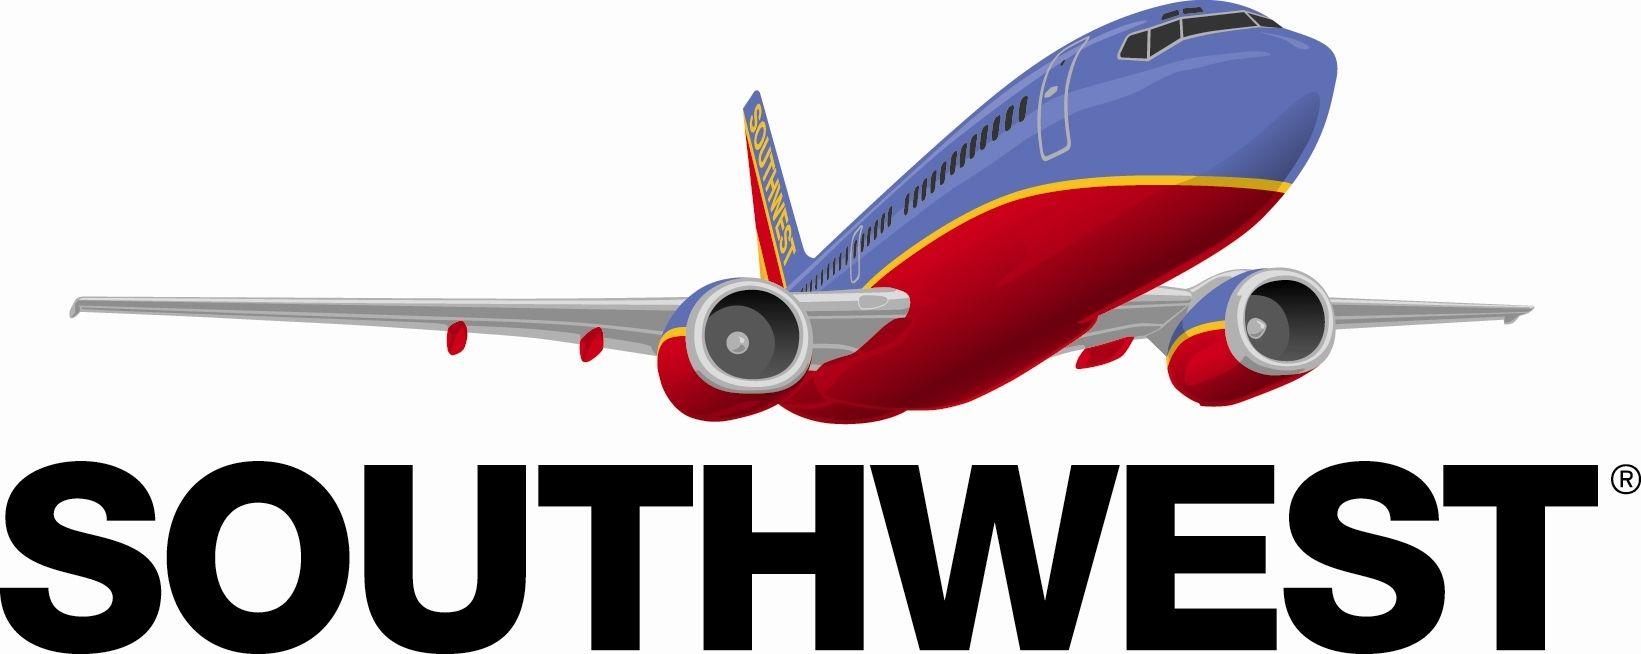 Lovely Southwest Airlines Logo Image 92 In Best Logos With